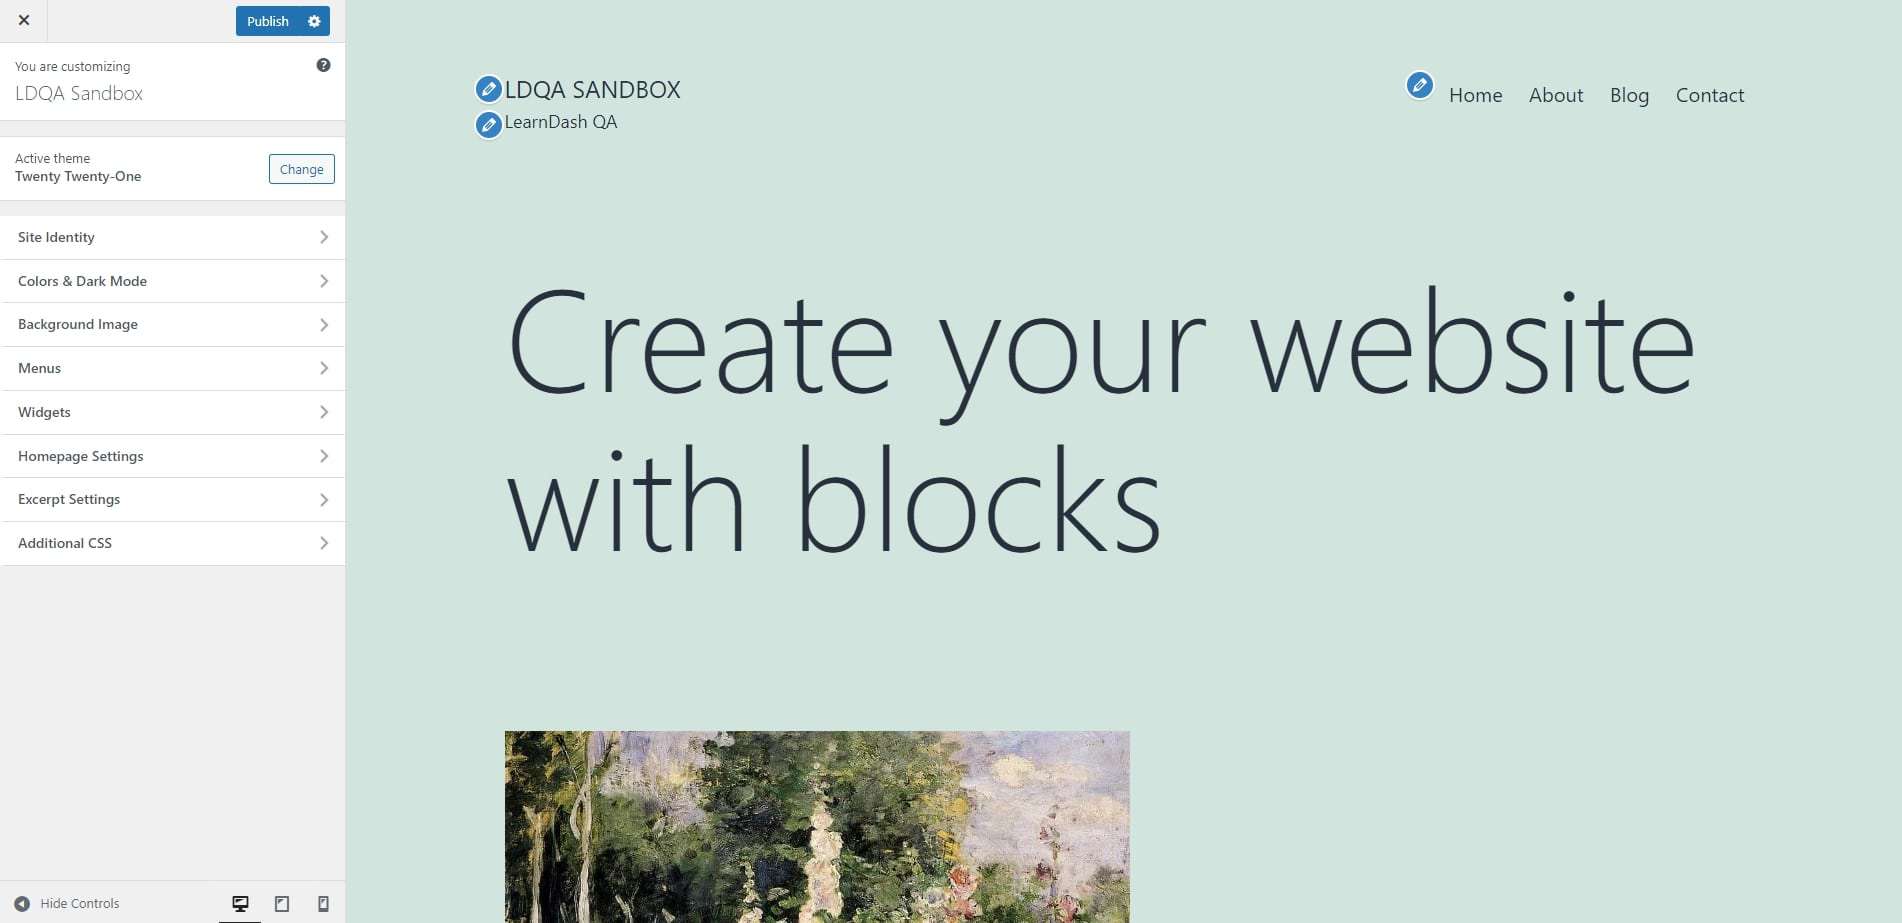 WordPress Customizer offers pre-programmed blocks you can drag onto webpages.